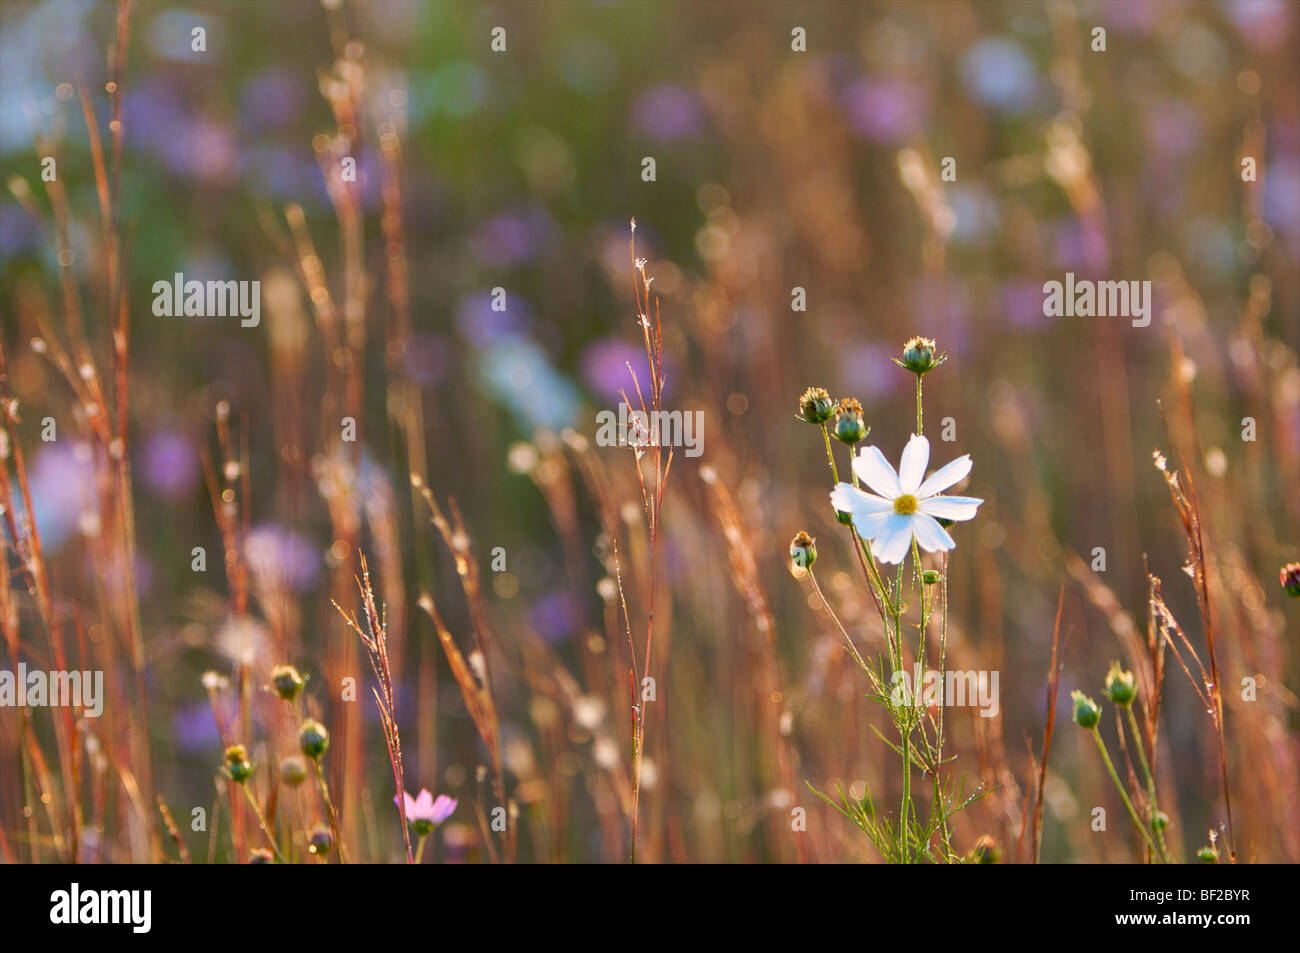 Soft focus image of a field of Cosmos (Cosmos bipinnatus), Northern KwaZulu-Natal Province, South Africa Stock Photo